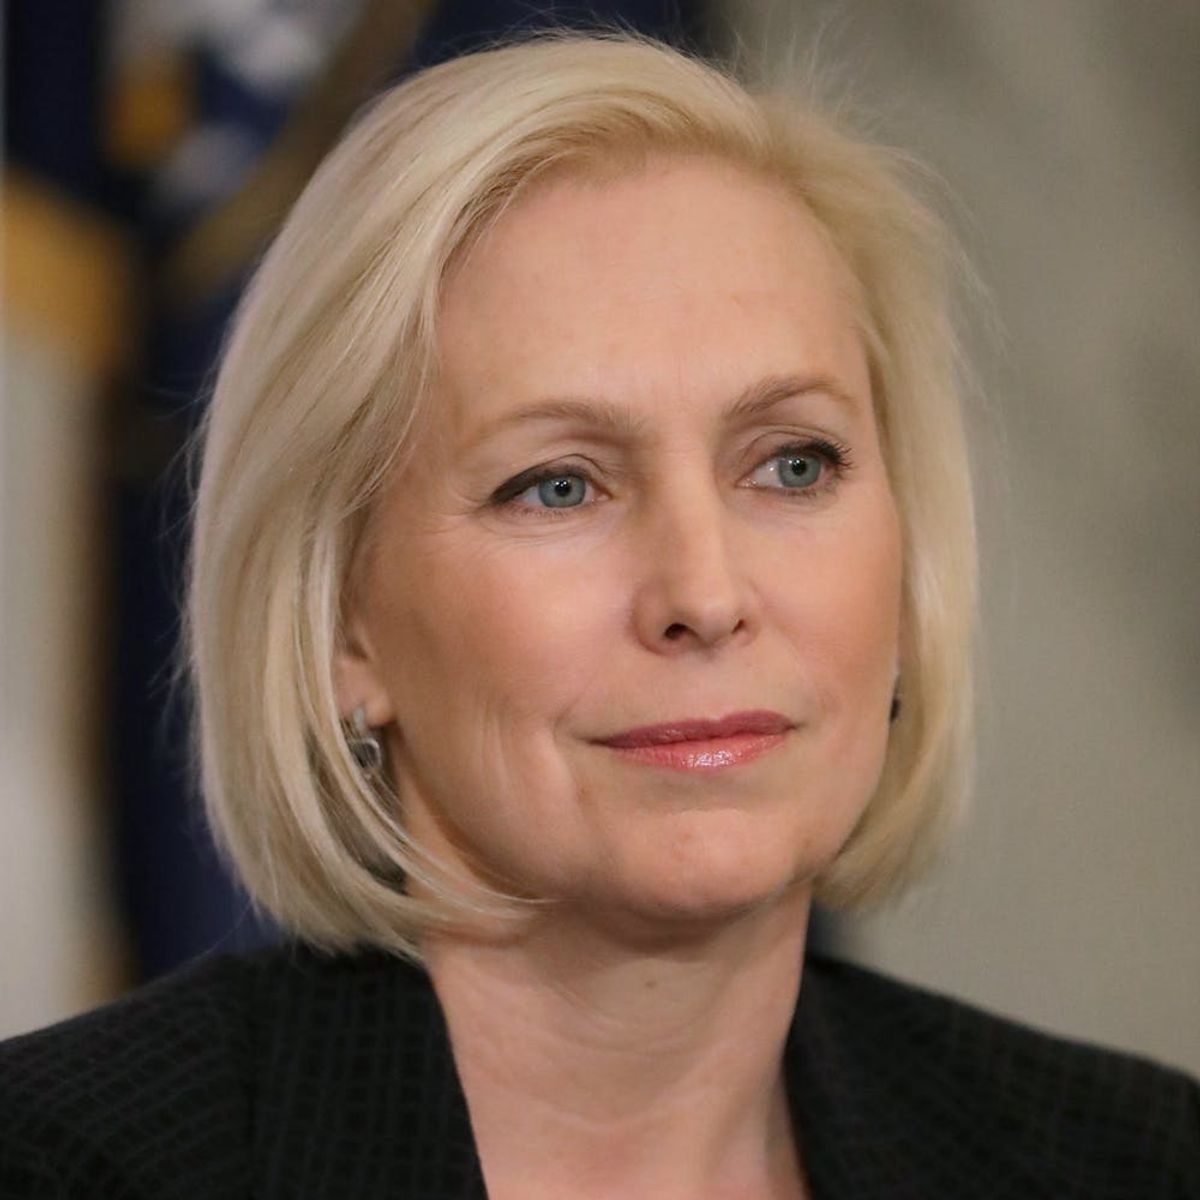 Kirsten Gillibrand Becomes Third Woman Democrat to Join 2020 Presidential Race